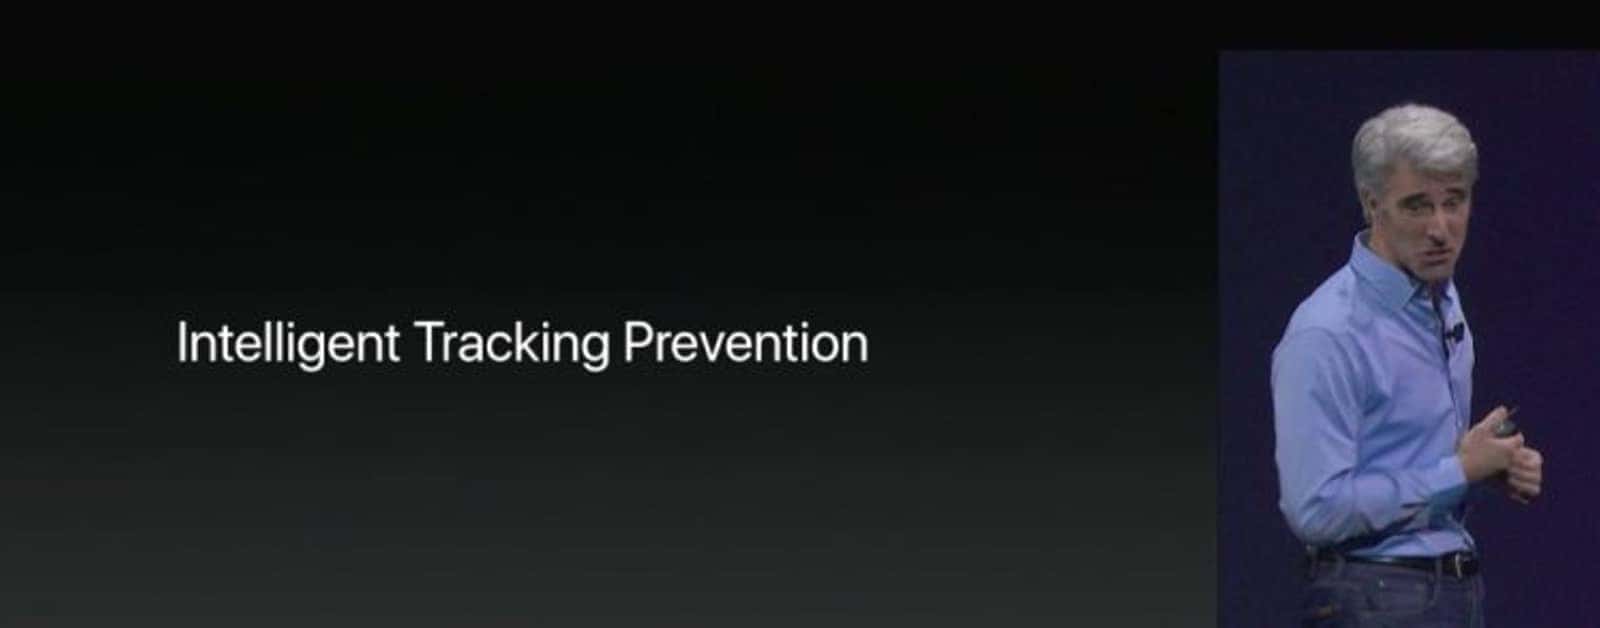 macOS: How to Prevent Tracking in Safari macOS High Sierra